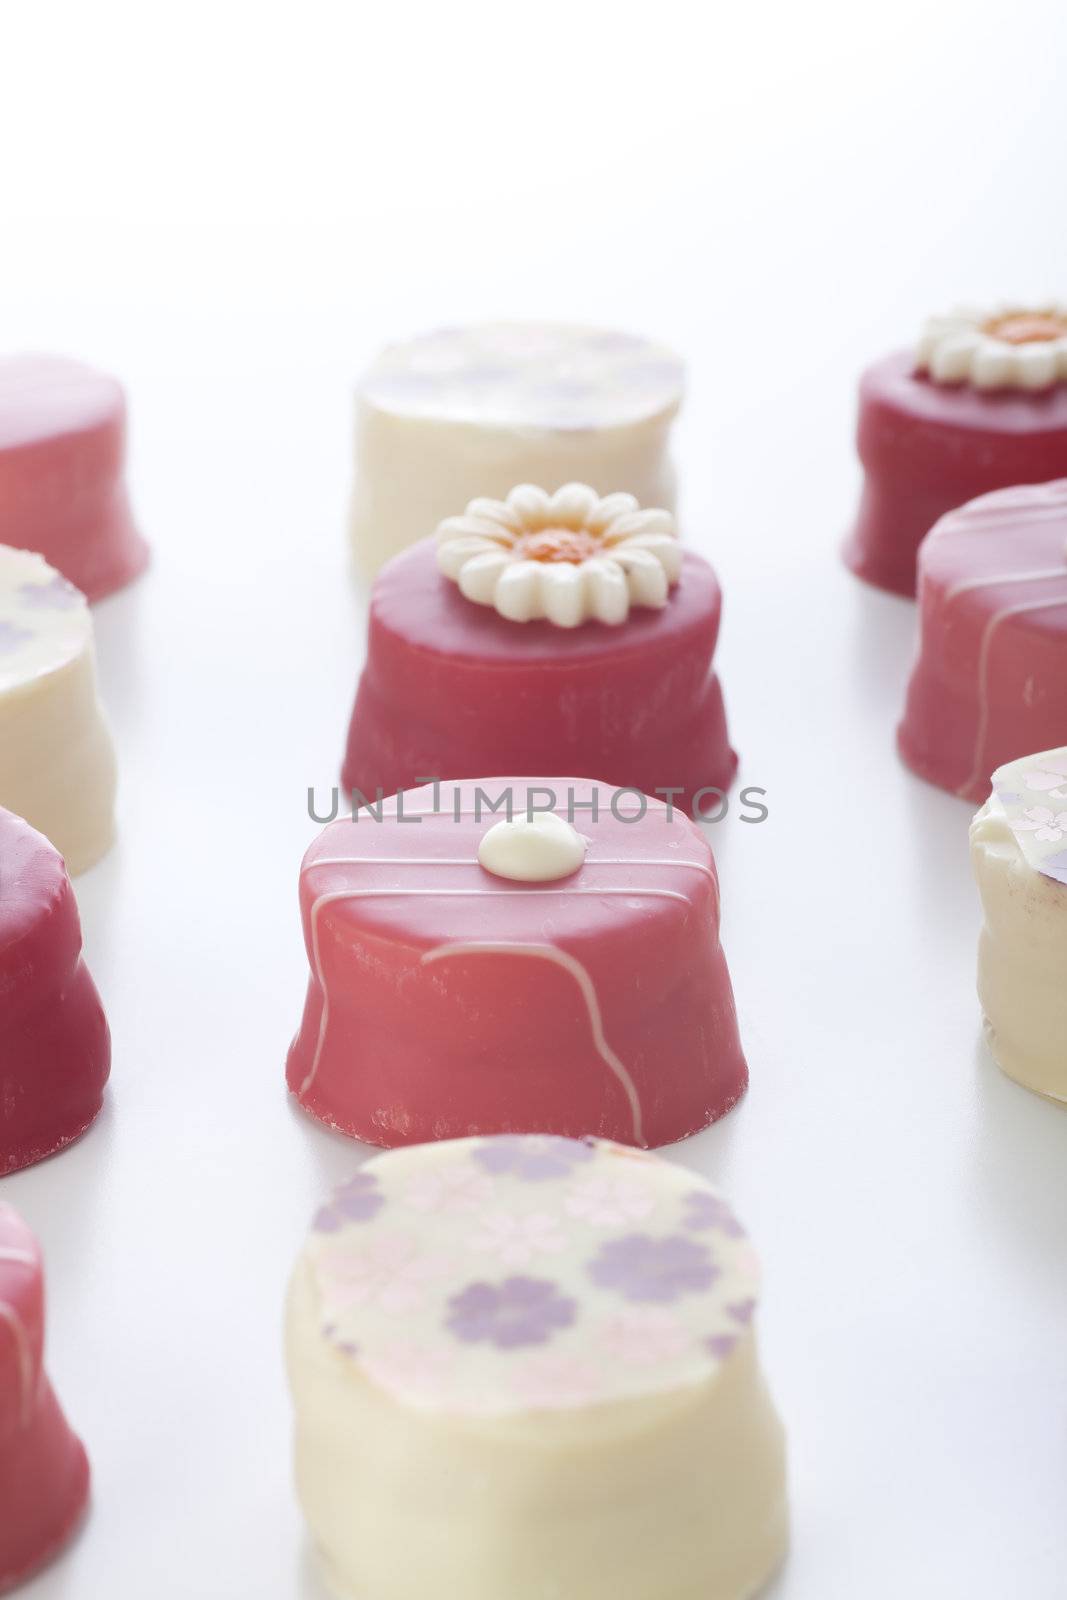 Gourmet pink petits fours image with vertical orientation.